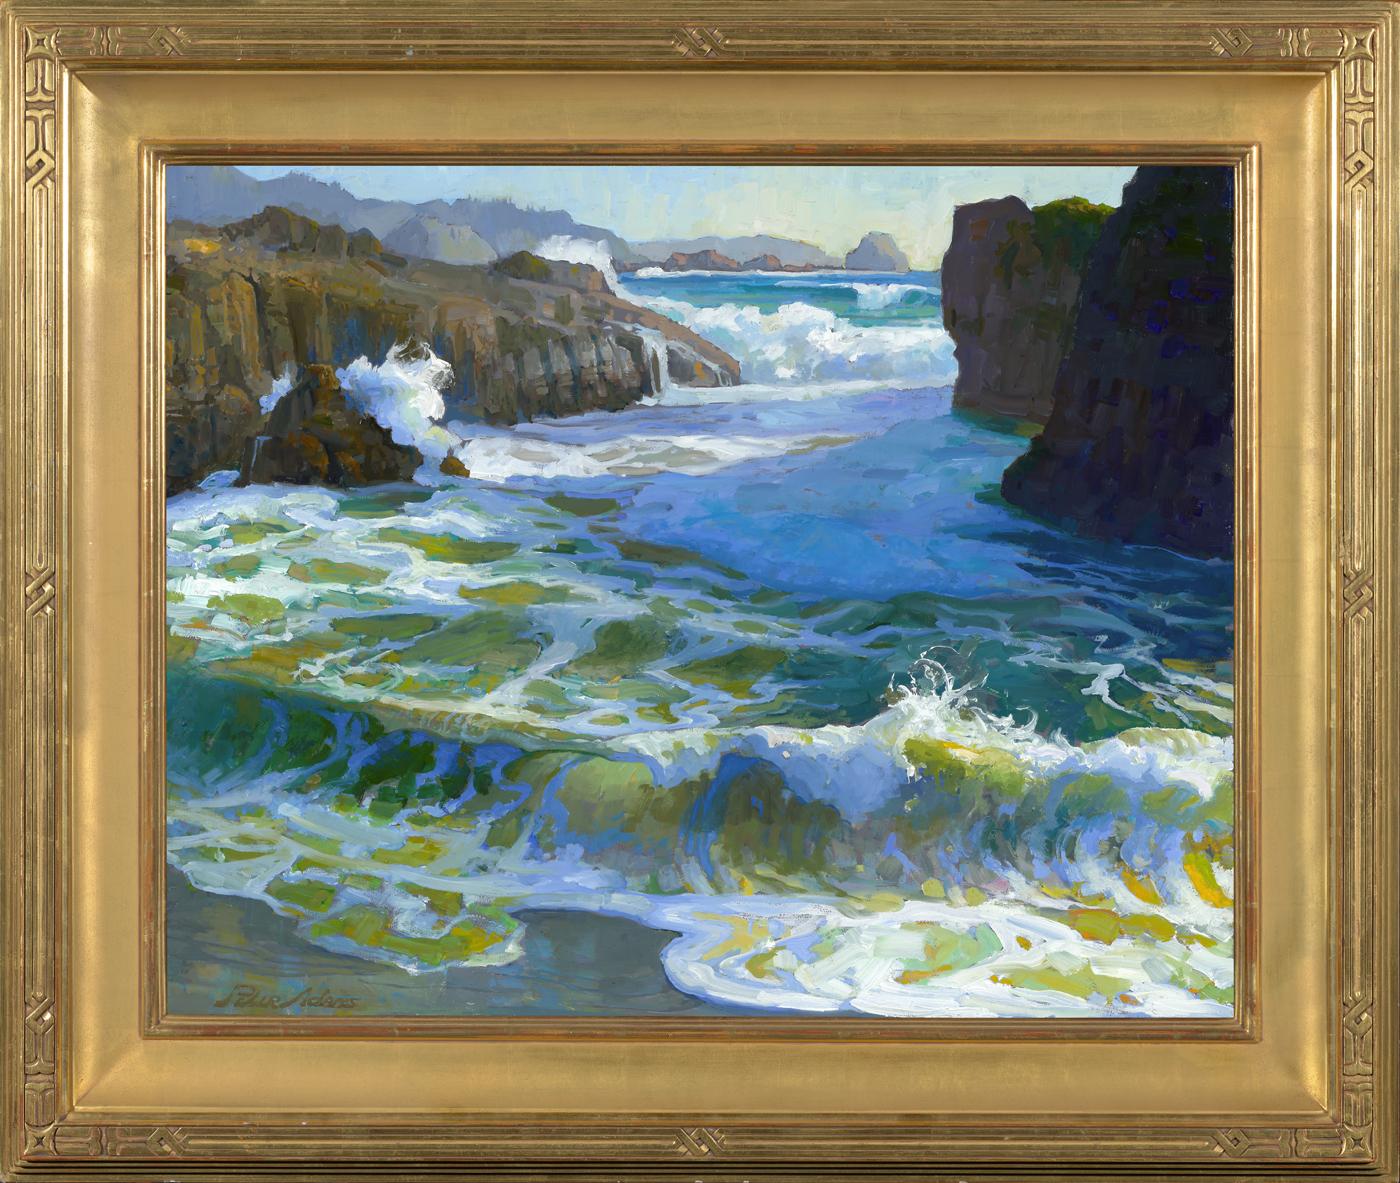 Peter Adams Landscape Painting - Secret Cove; Afternoon Surge at Point Lobos State Reserve